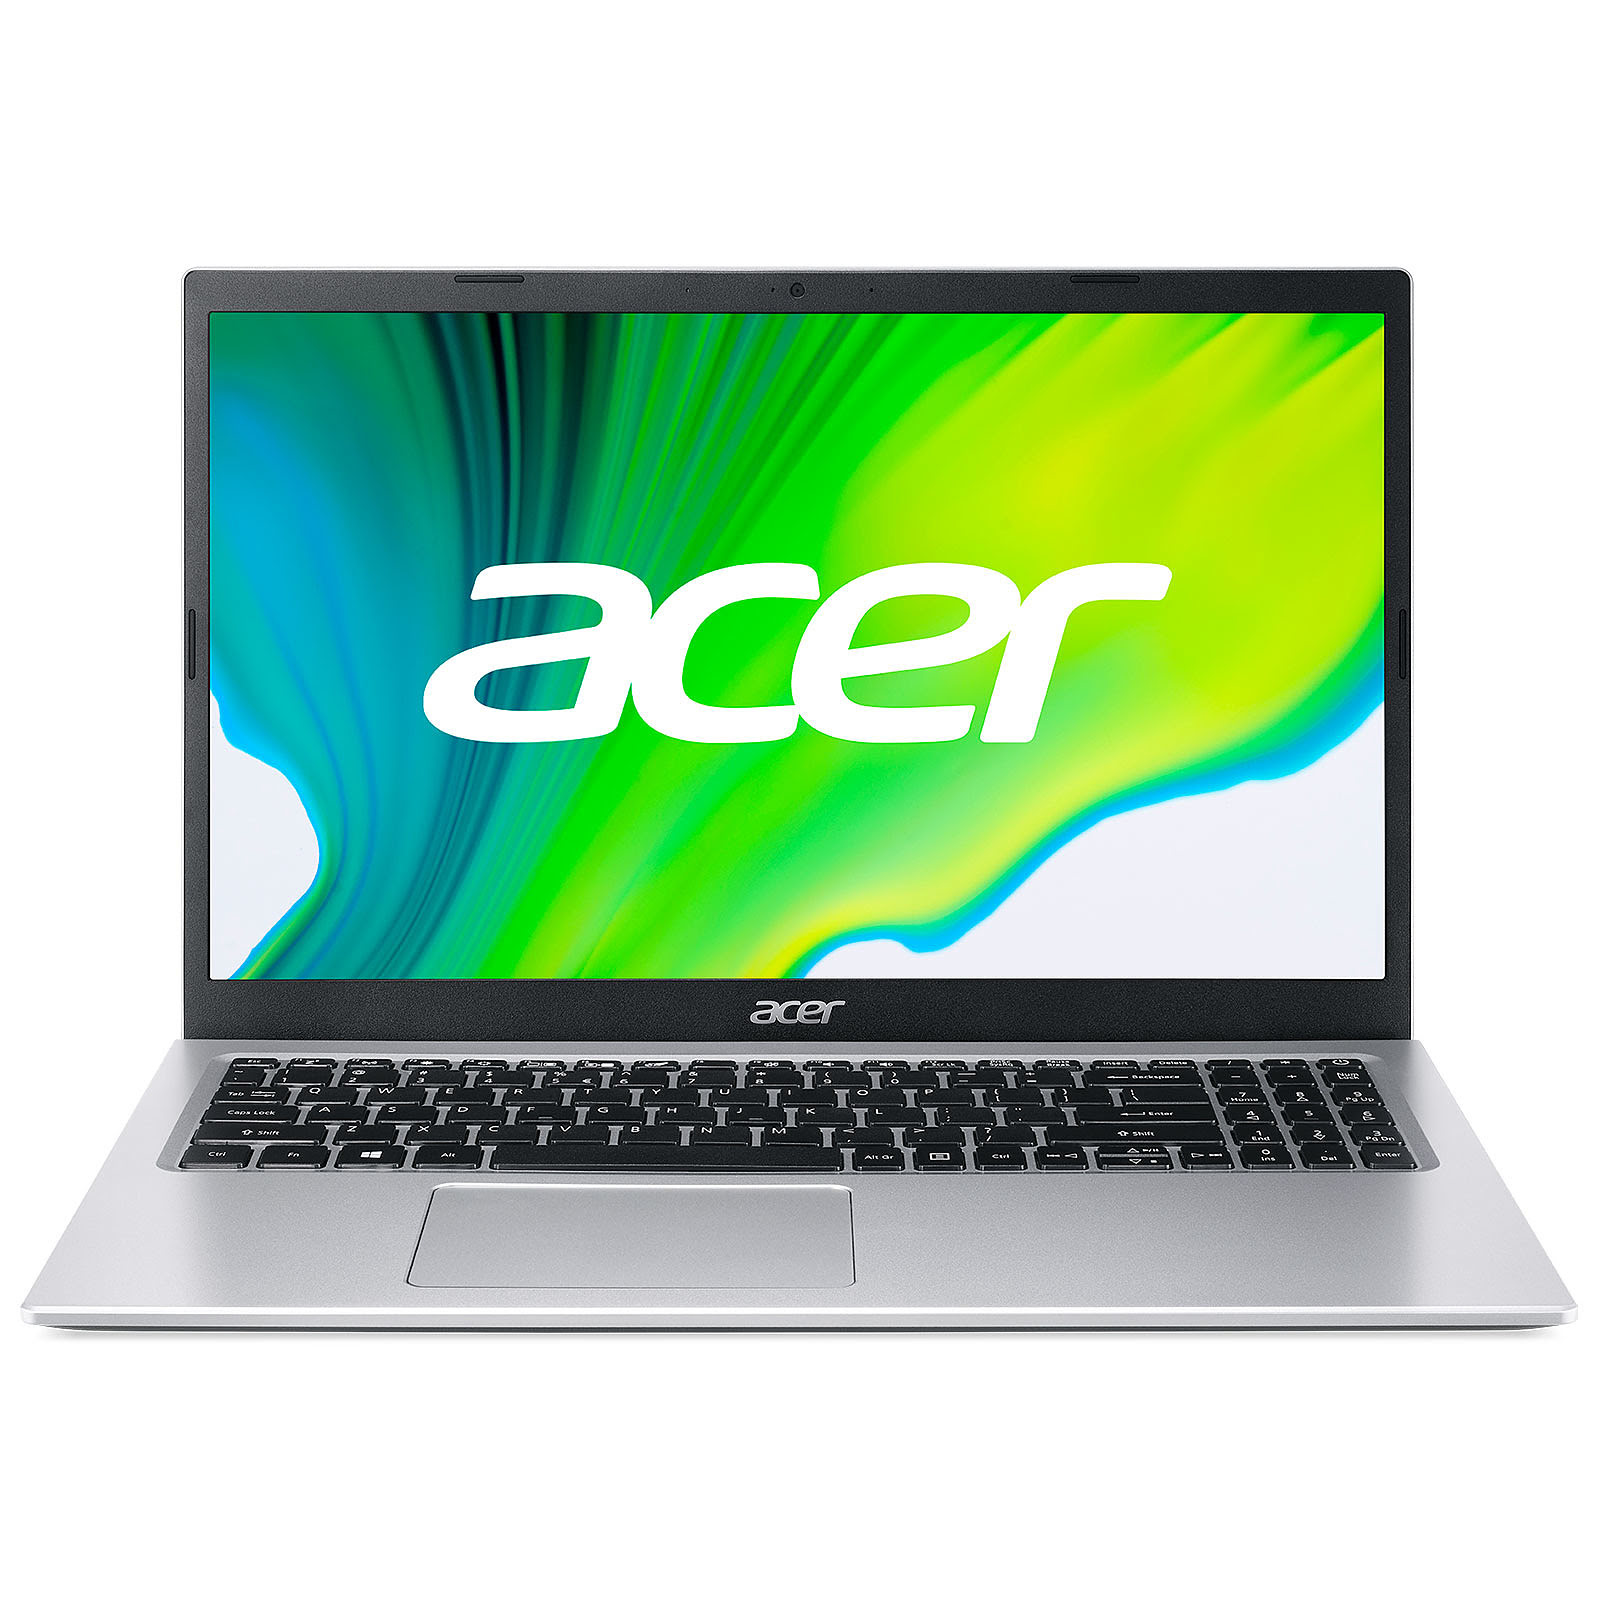 Acer NX.A6LEF.008 - PC portable Acer - grosbill-pro.com - 3